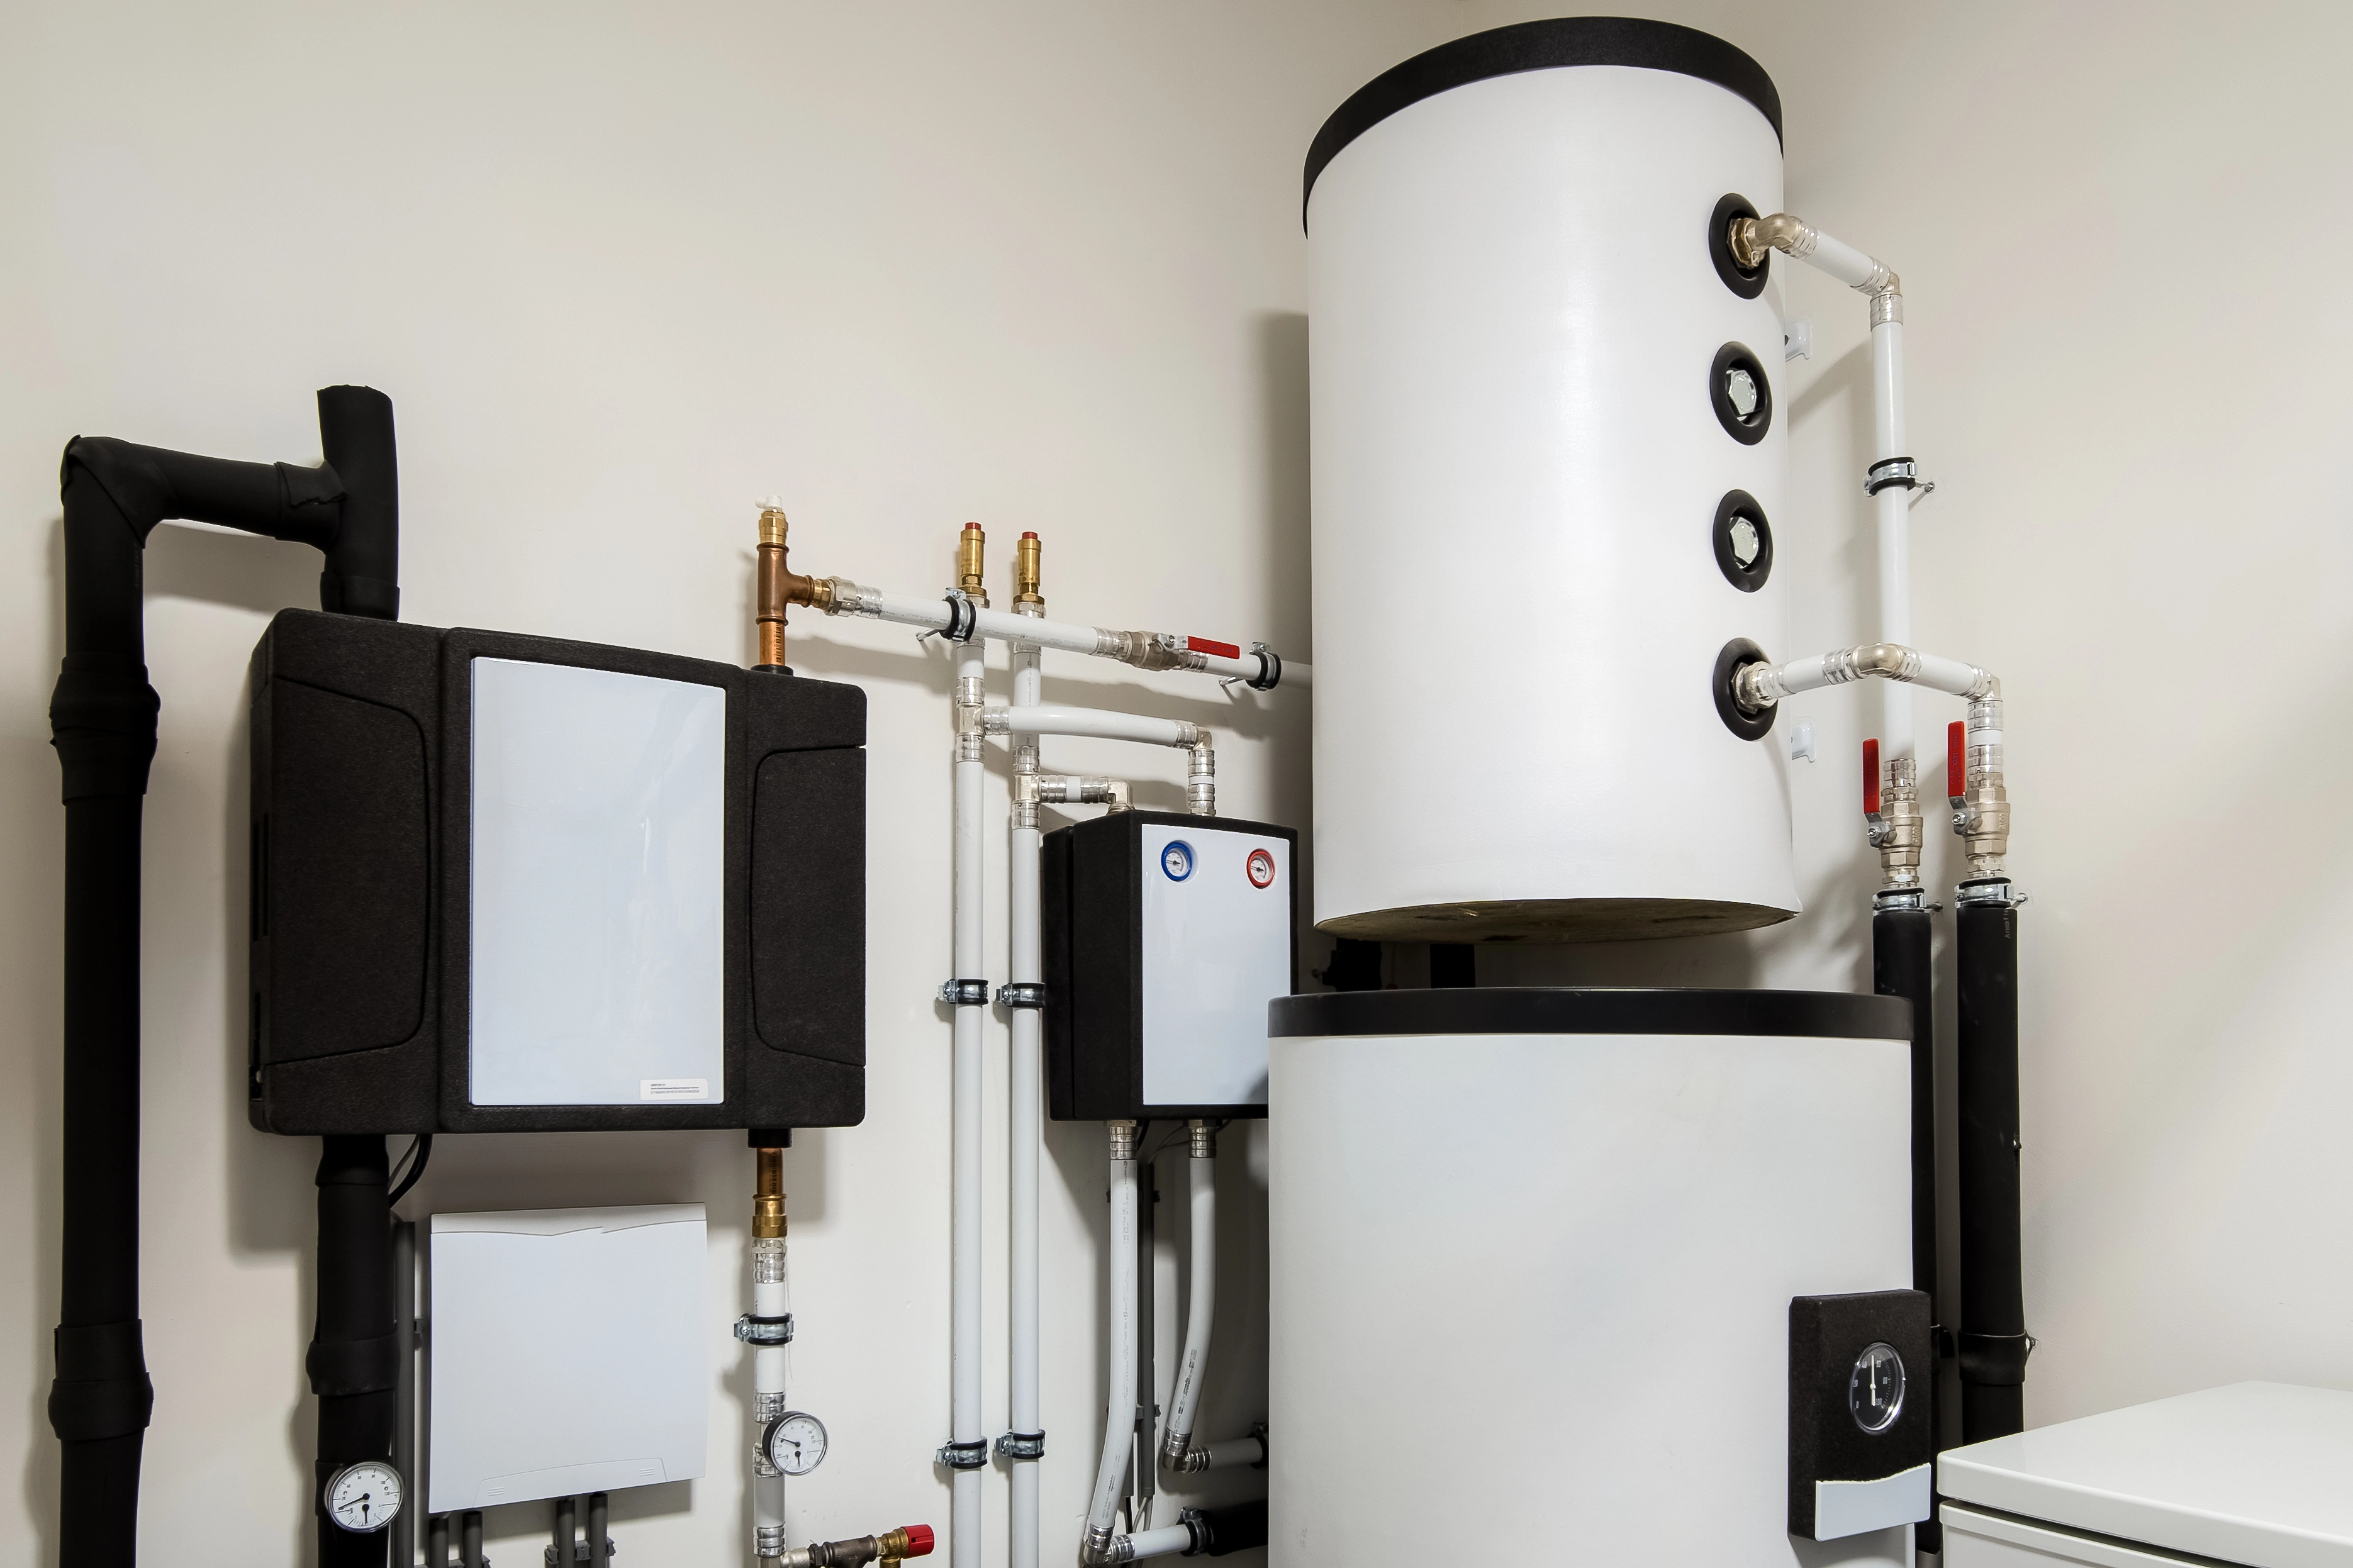 Hydronics and domestic hot water systems